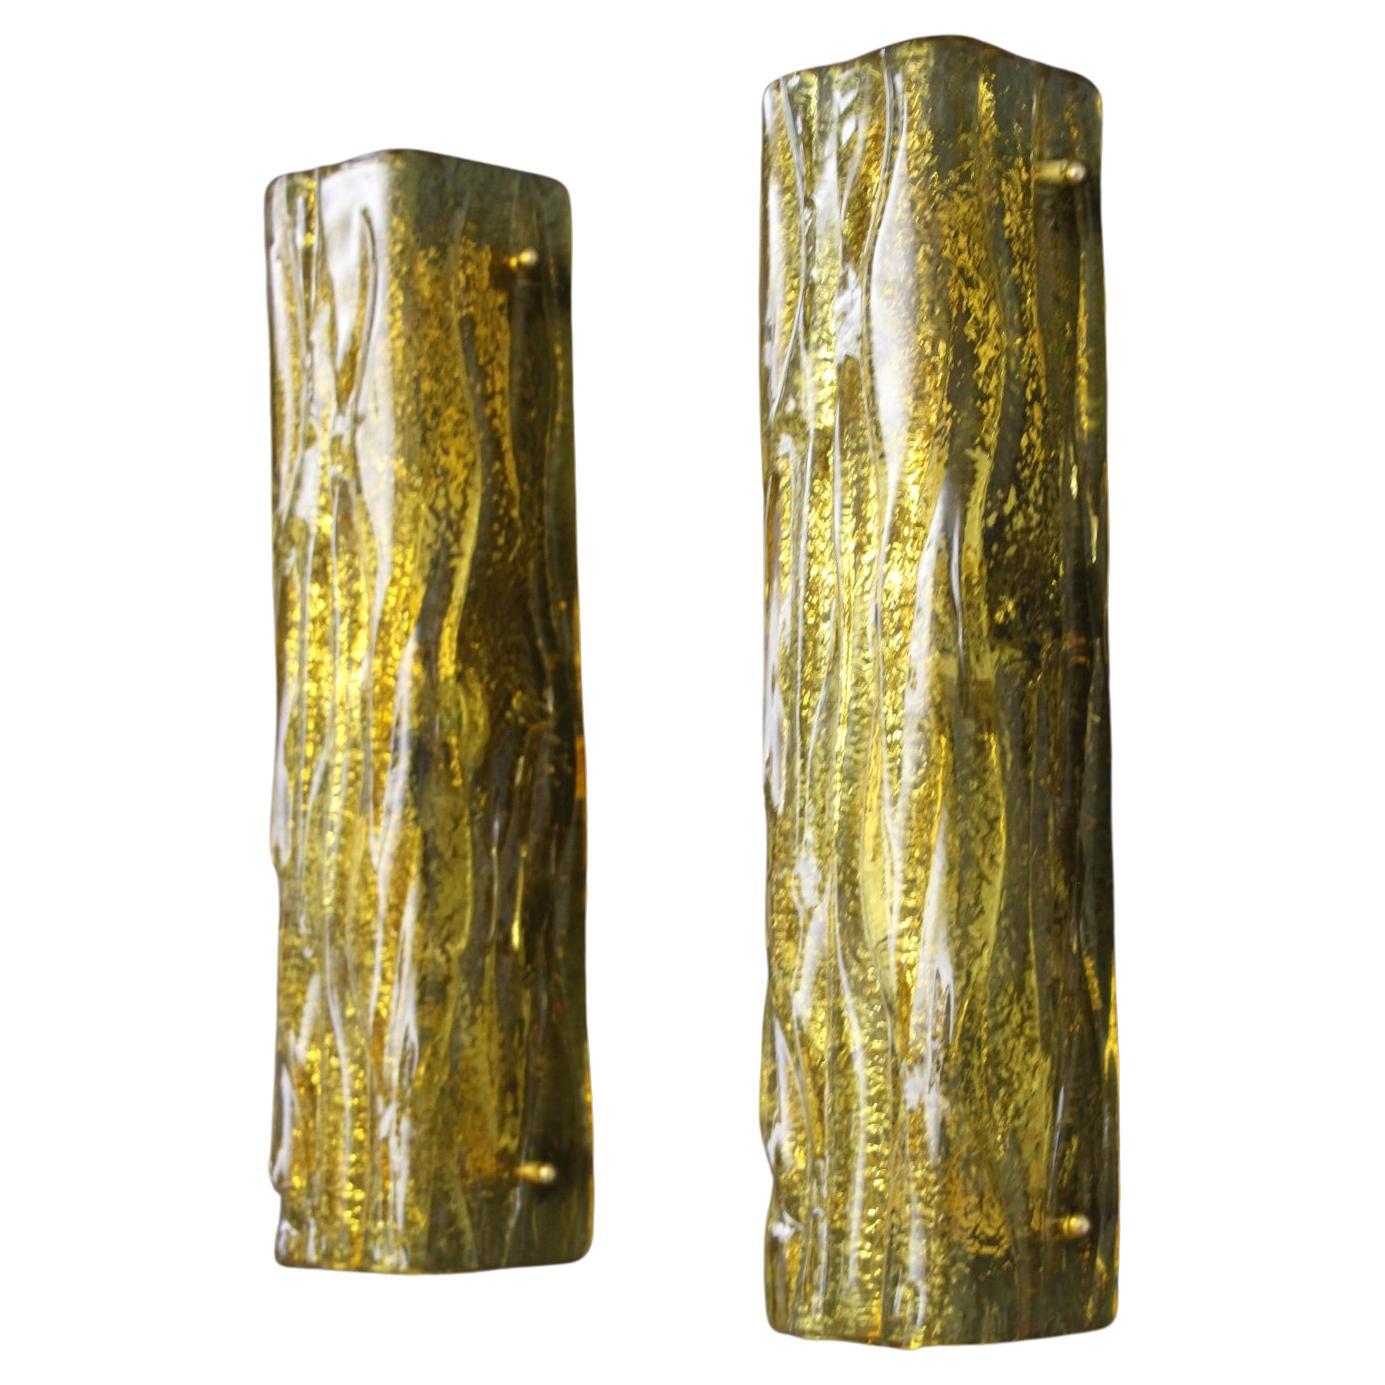 Pair of Golden Murano Glass Sconces, Square Tube Wall Lights, Mazzega Style For Sale